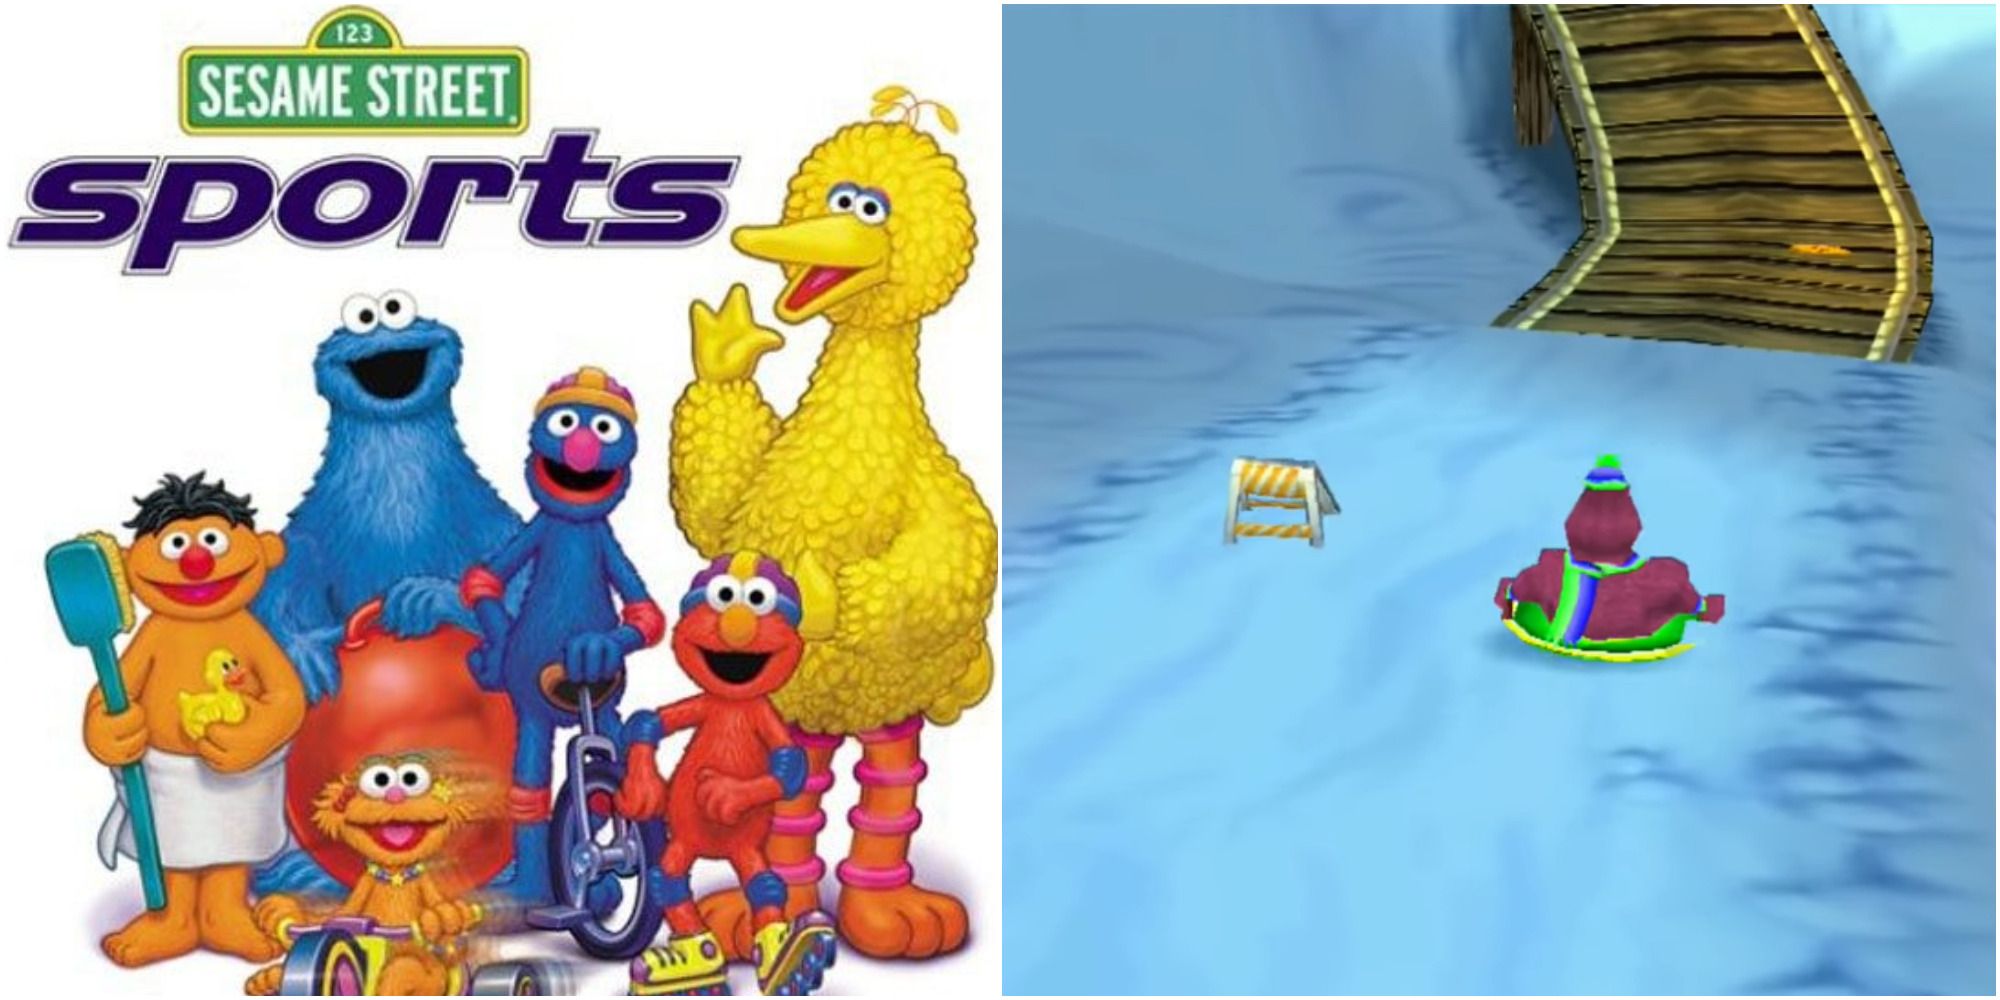 sesame street sports cover & gameplay